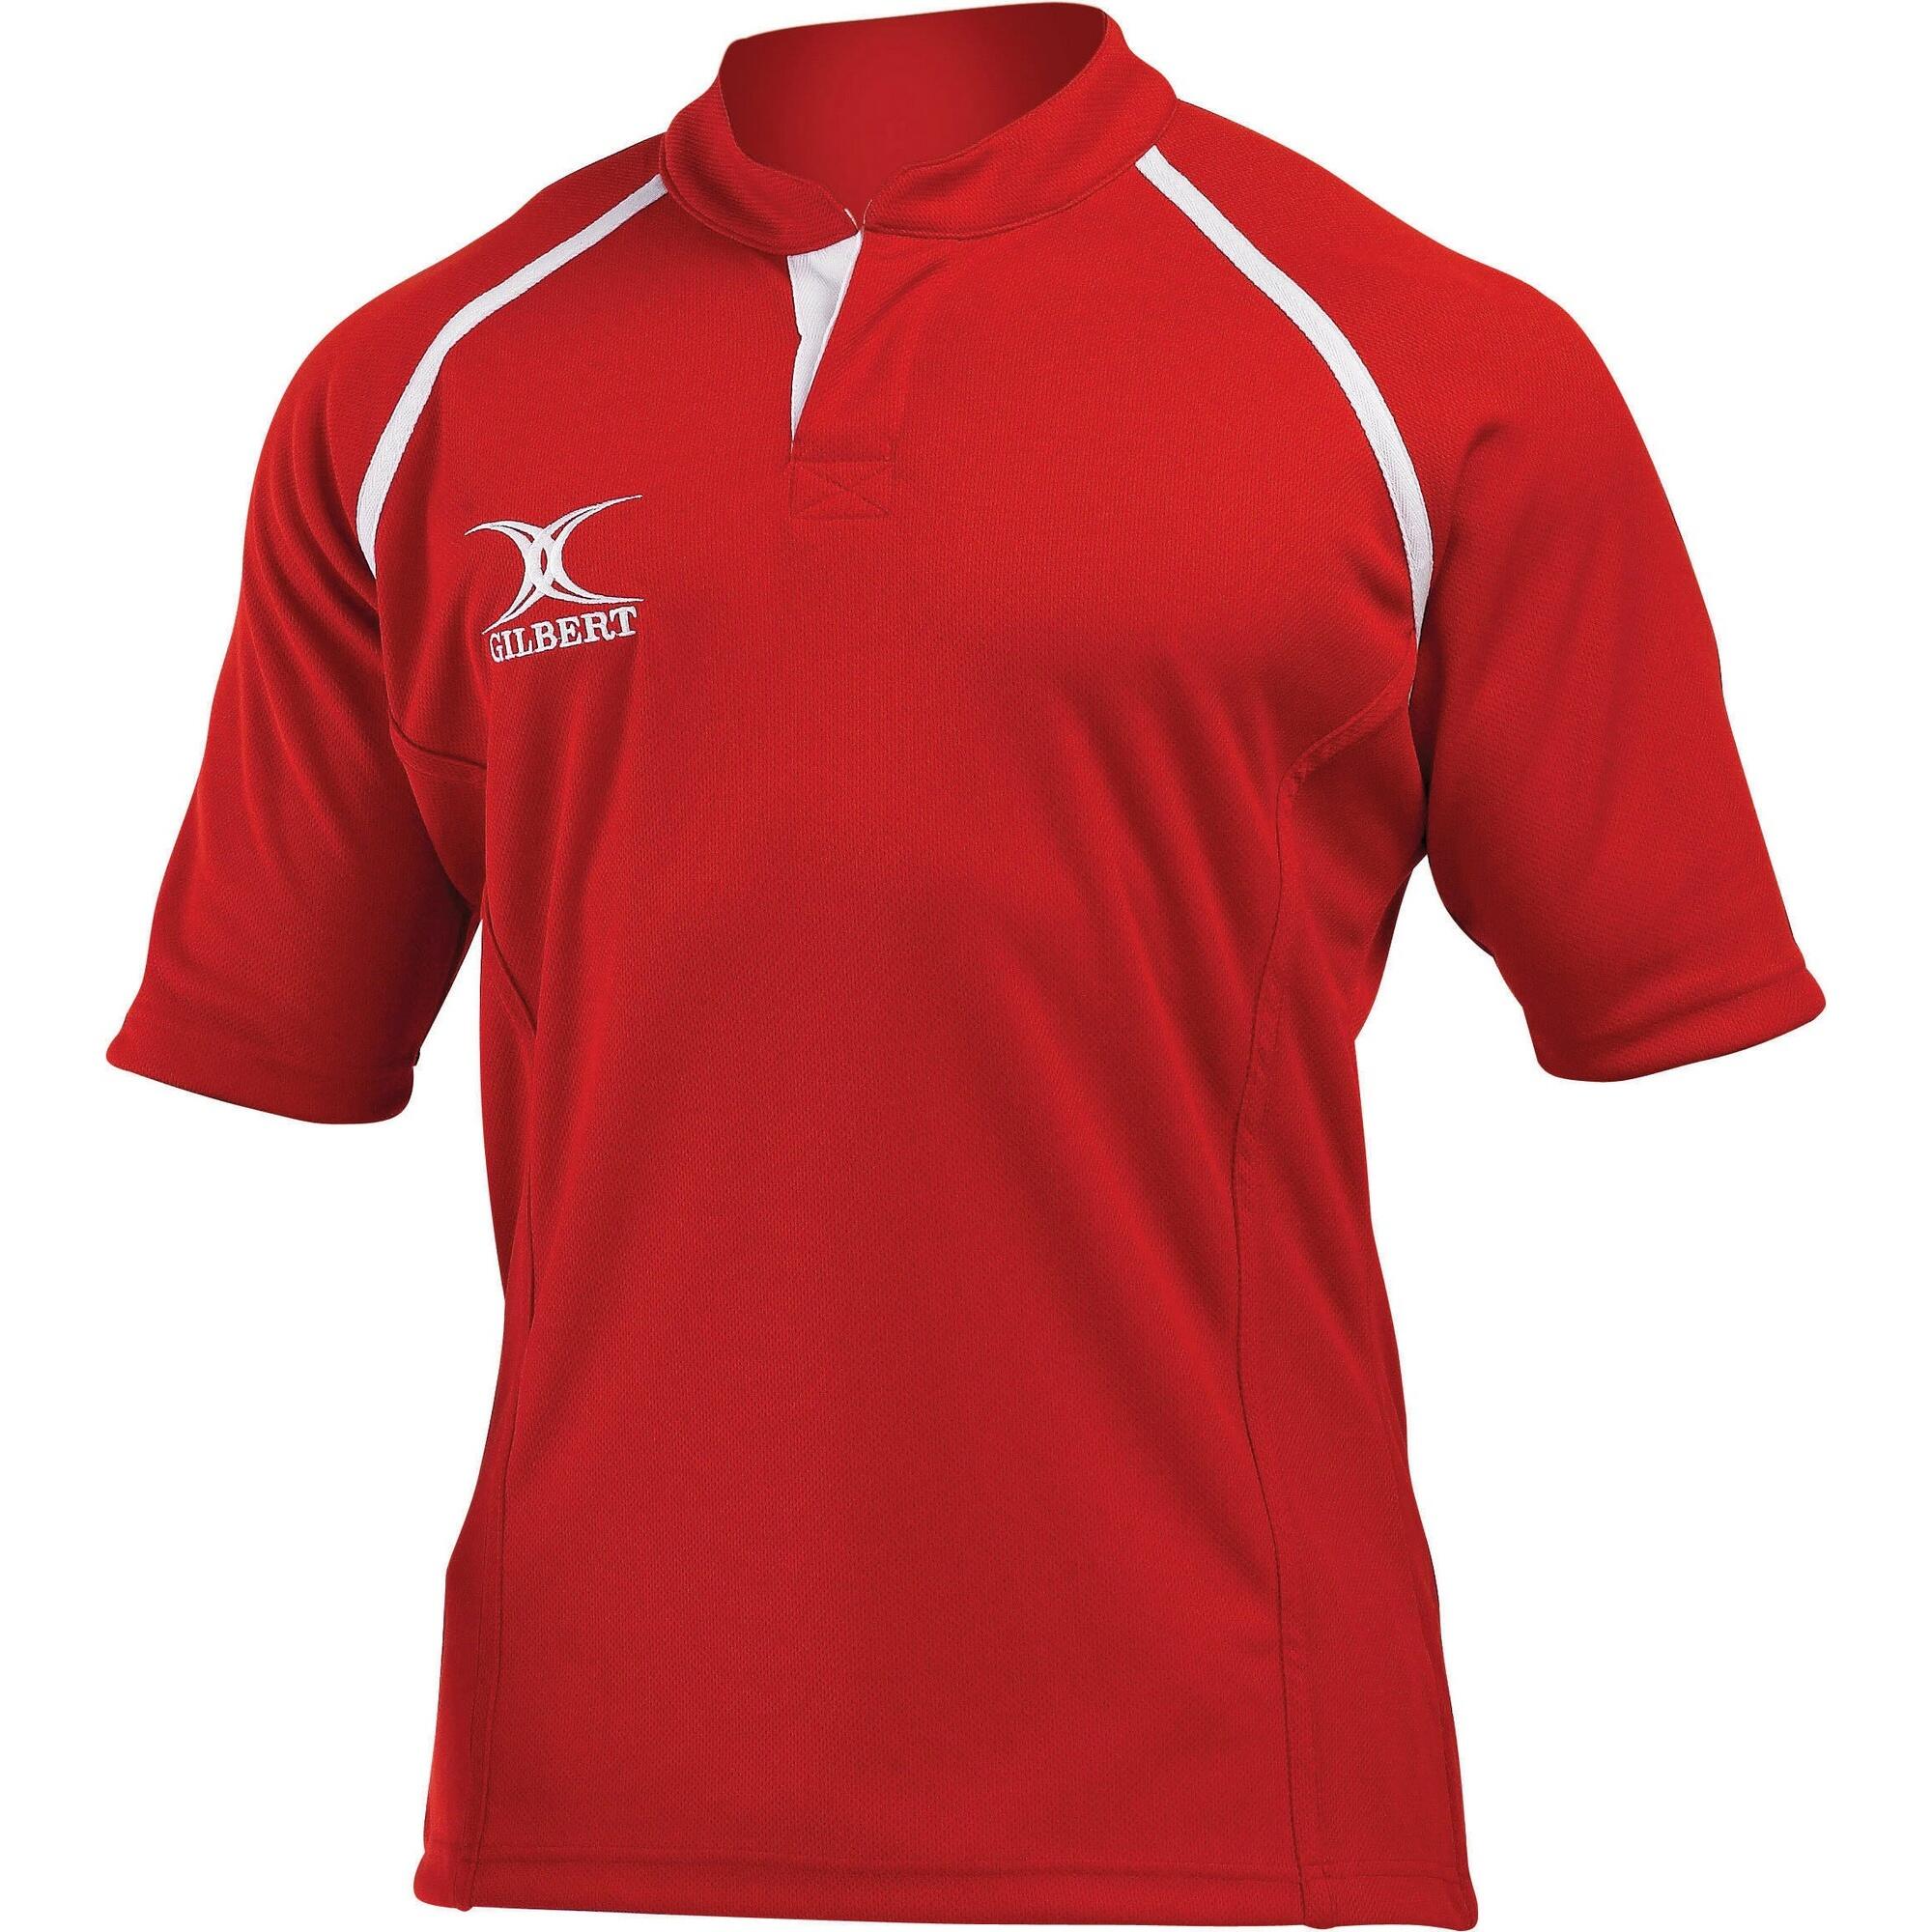 GILBERT Rugby Childrens/Kids Xact Match Short Sleeved Rugby Shirt (Red)